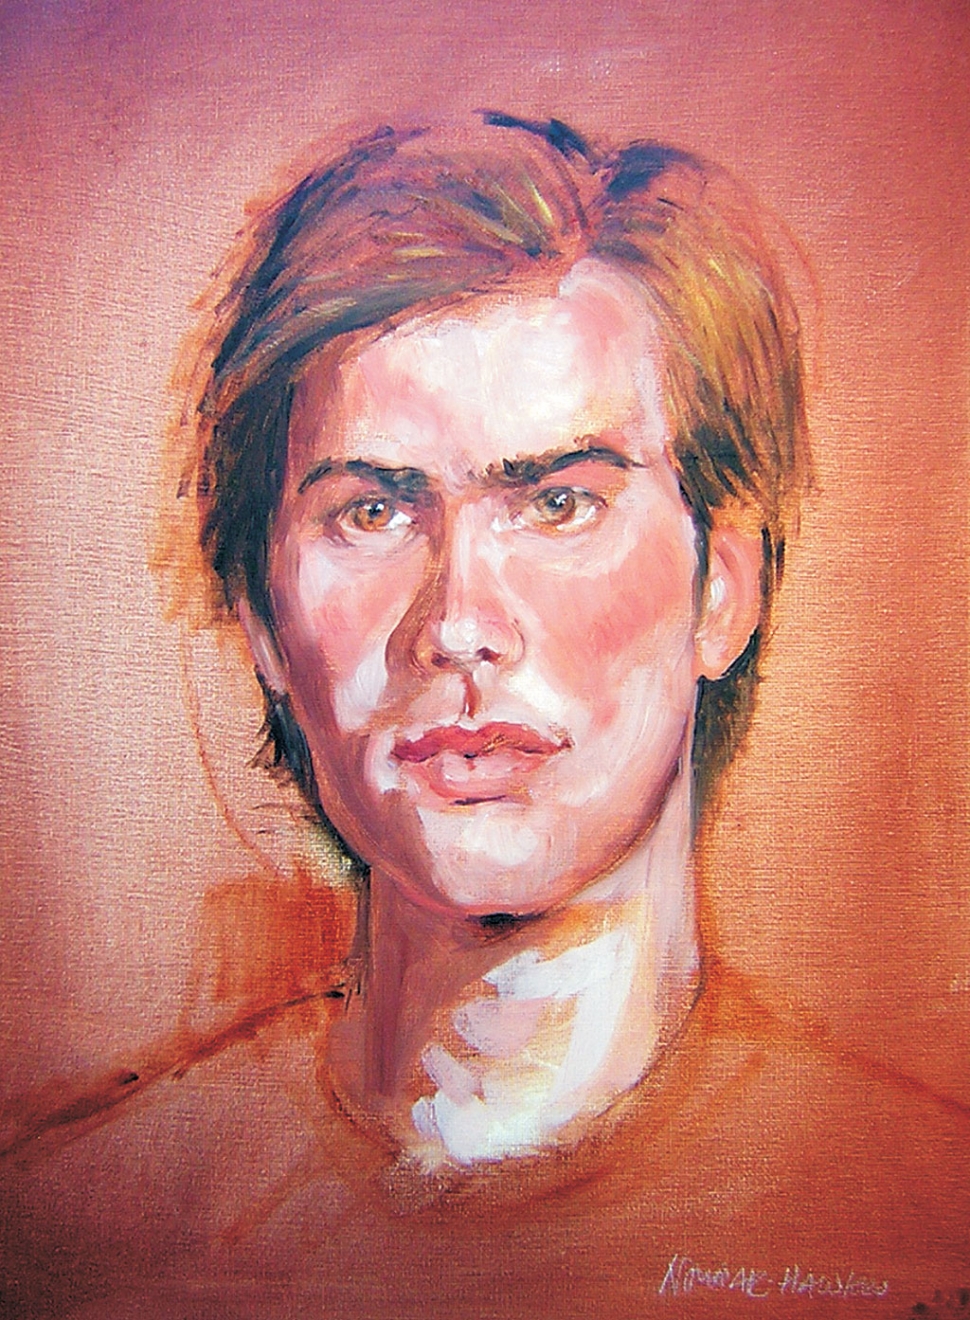 “Sketch of Andrew”, charcoal and colored pencils by Debi Nowak-Hawkes.